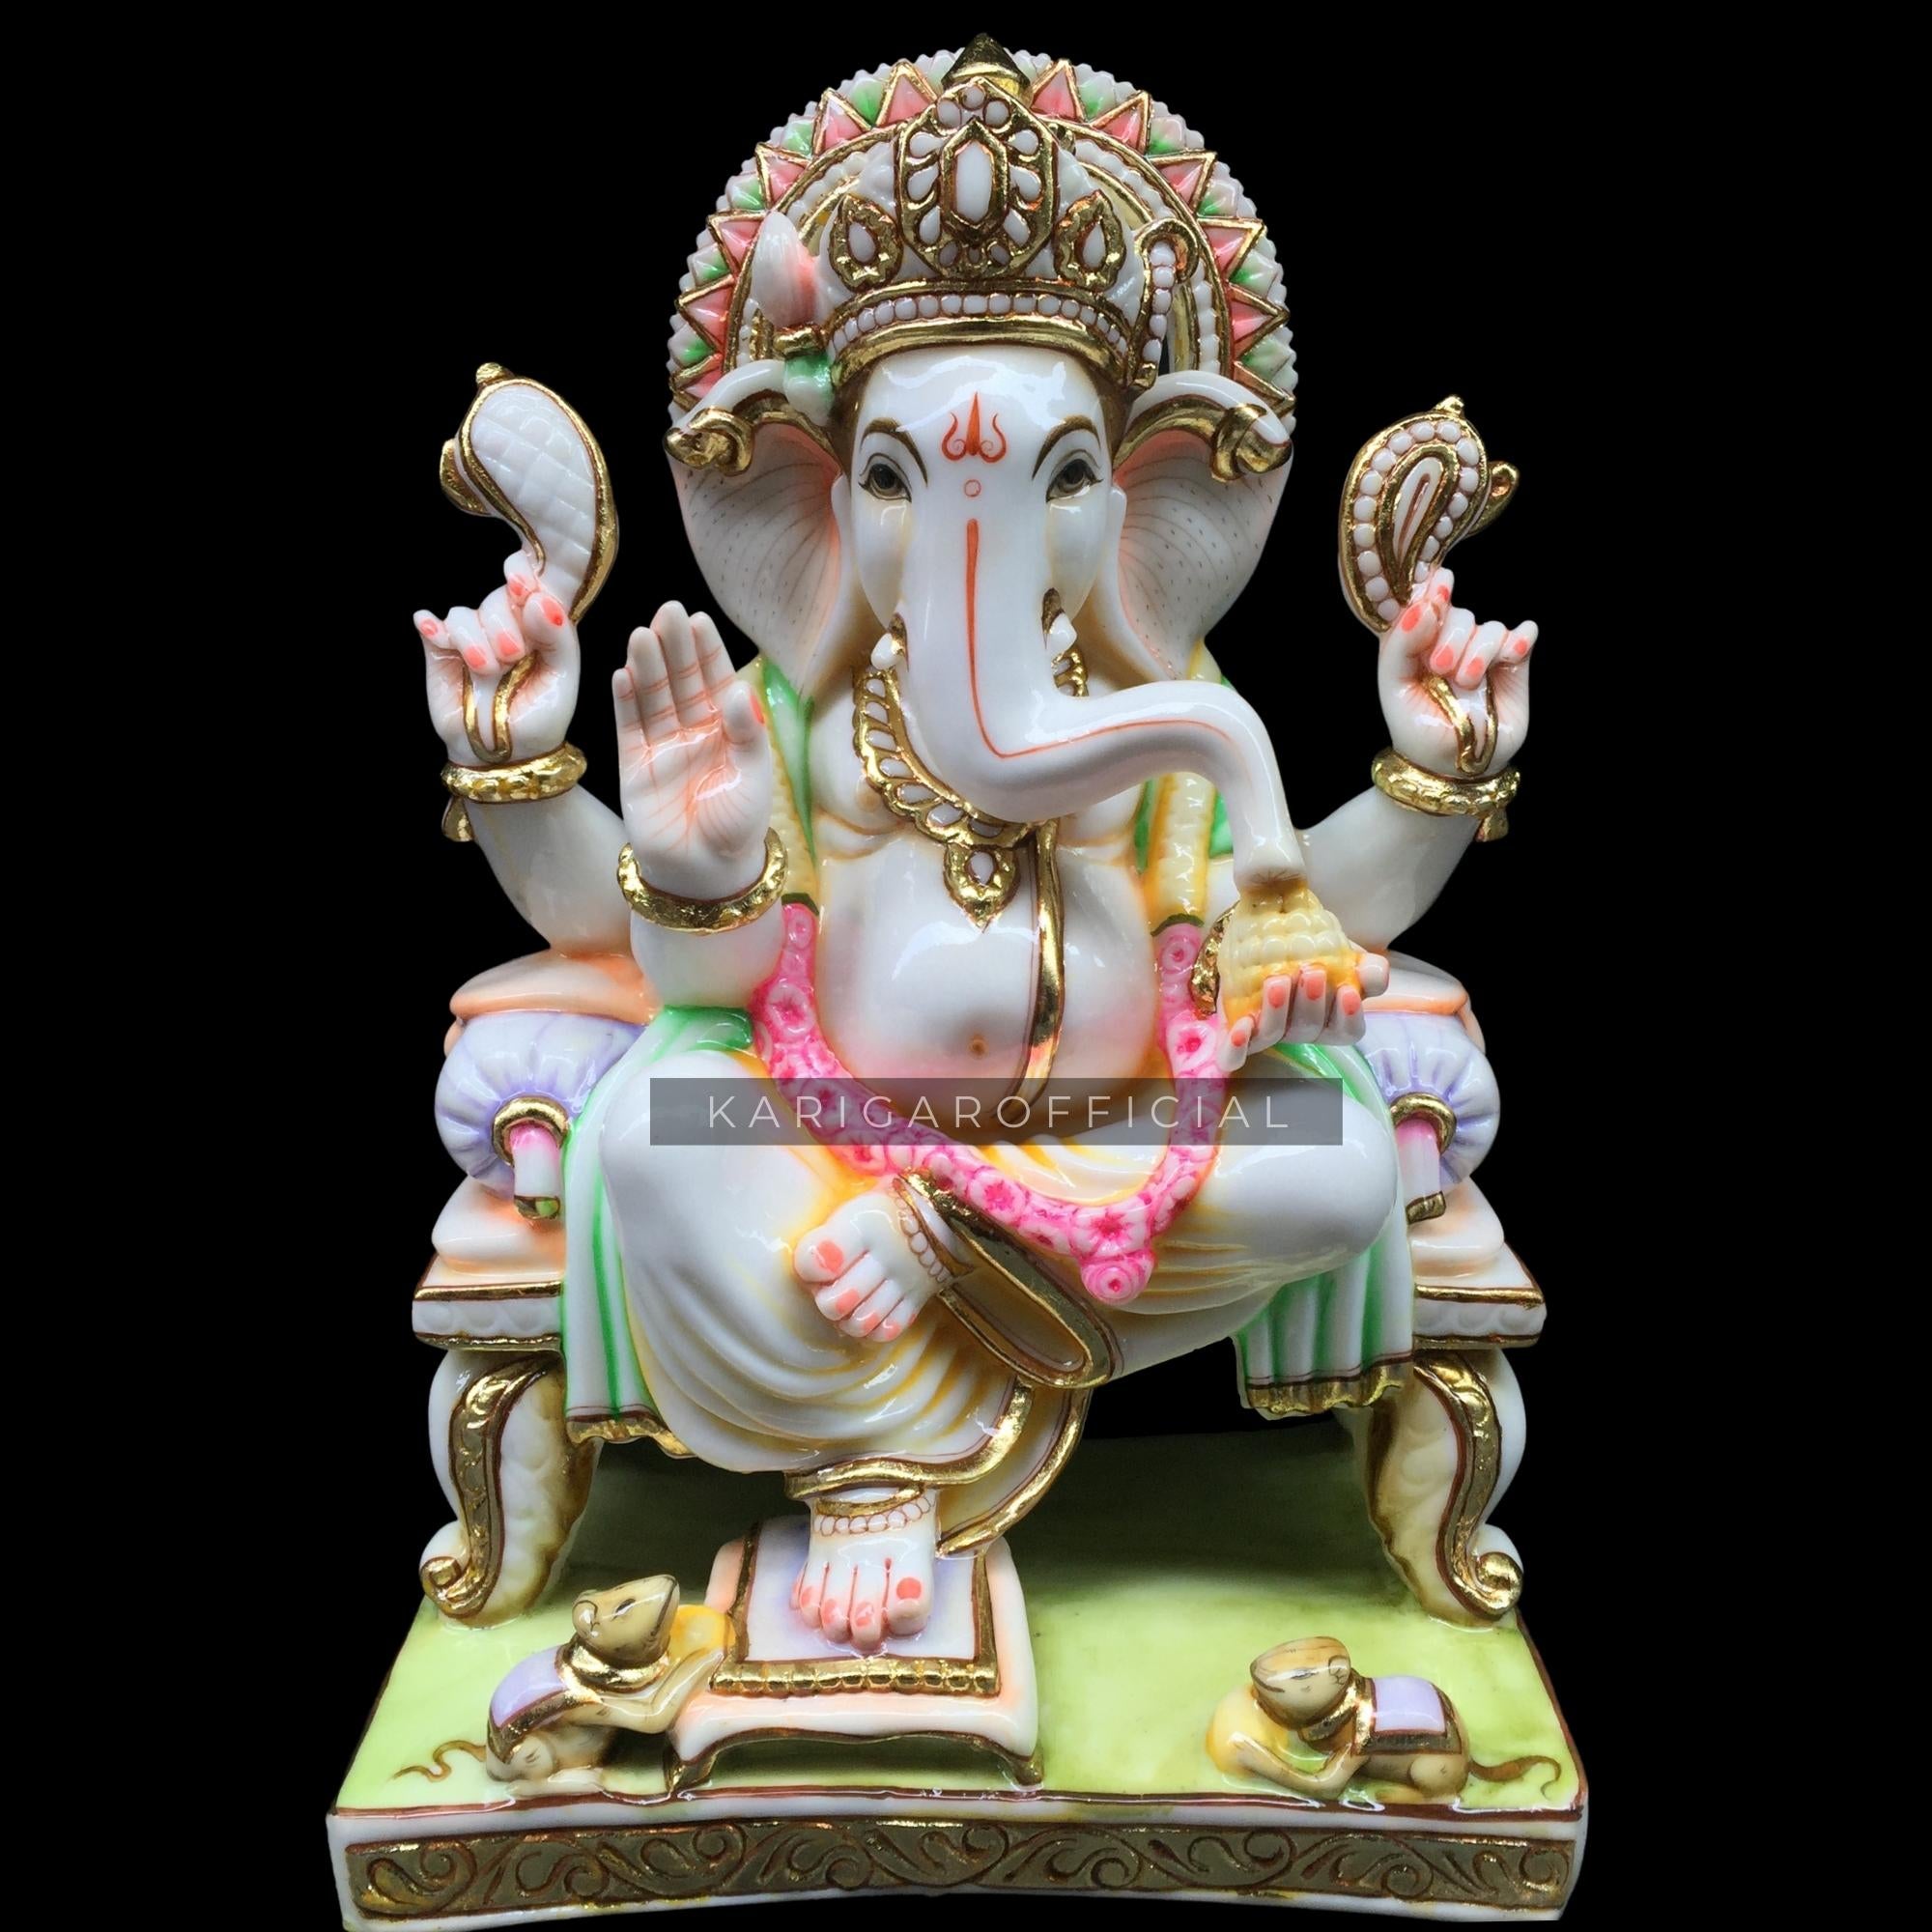 Buy CraftVatika Ganesh Idol for Car Dashboard, Ganesha Ganpati Idol for  Home Gift, Terracotta Statue Murti for Car Home Decor Temple Puja Room Gift  Online at Low Prices in India - Amazon.in